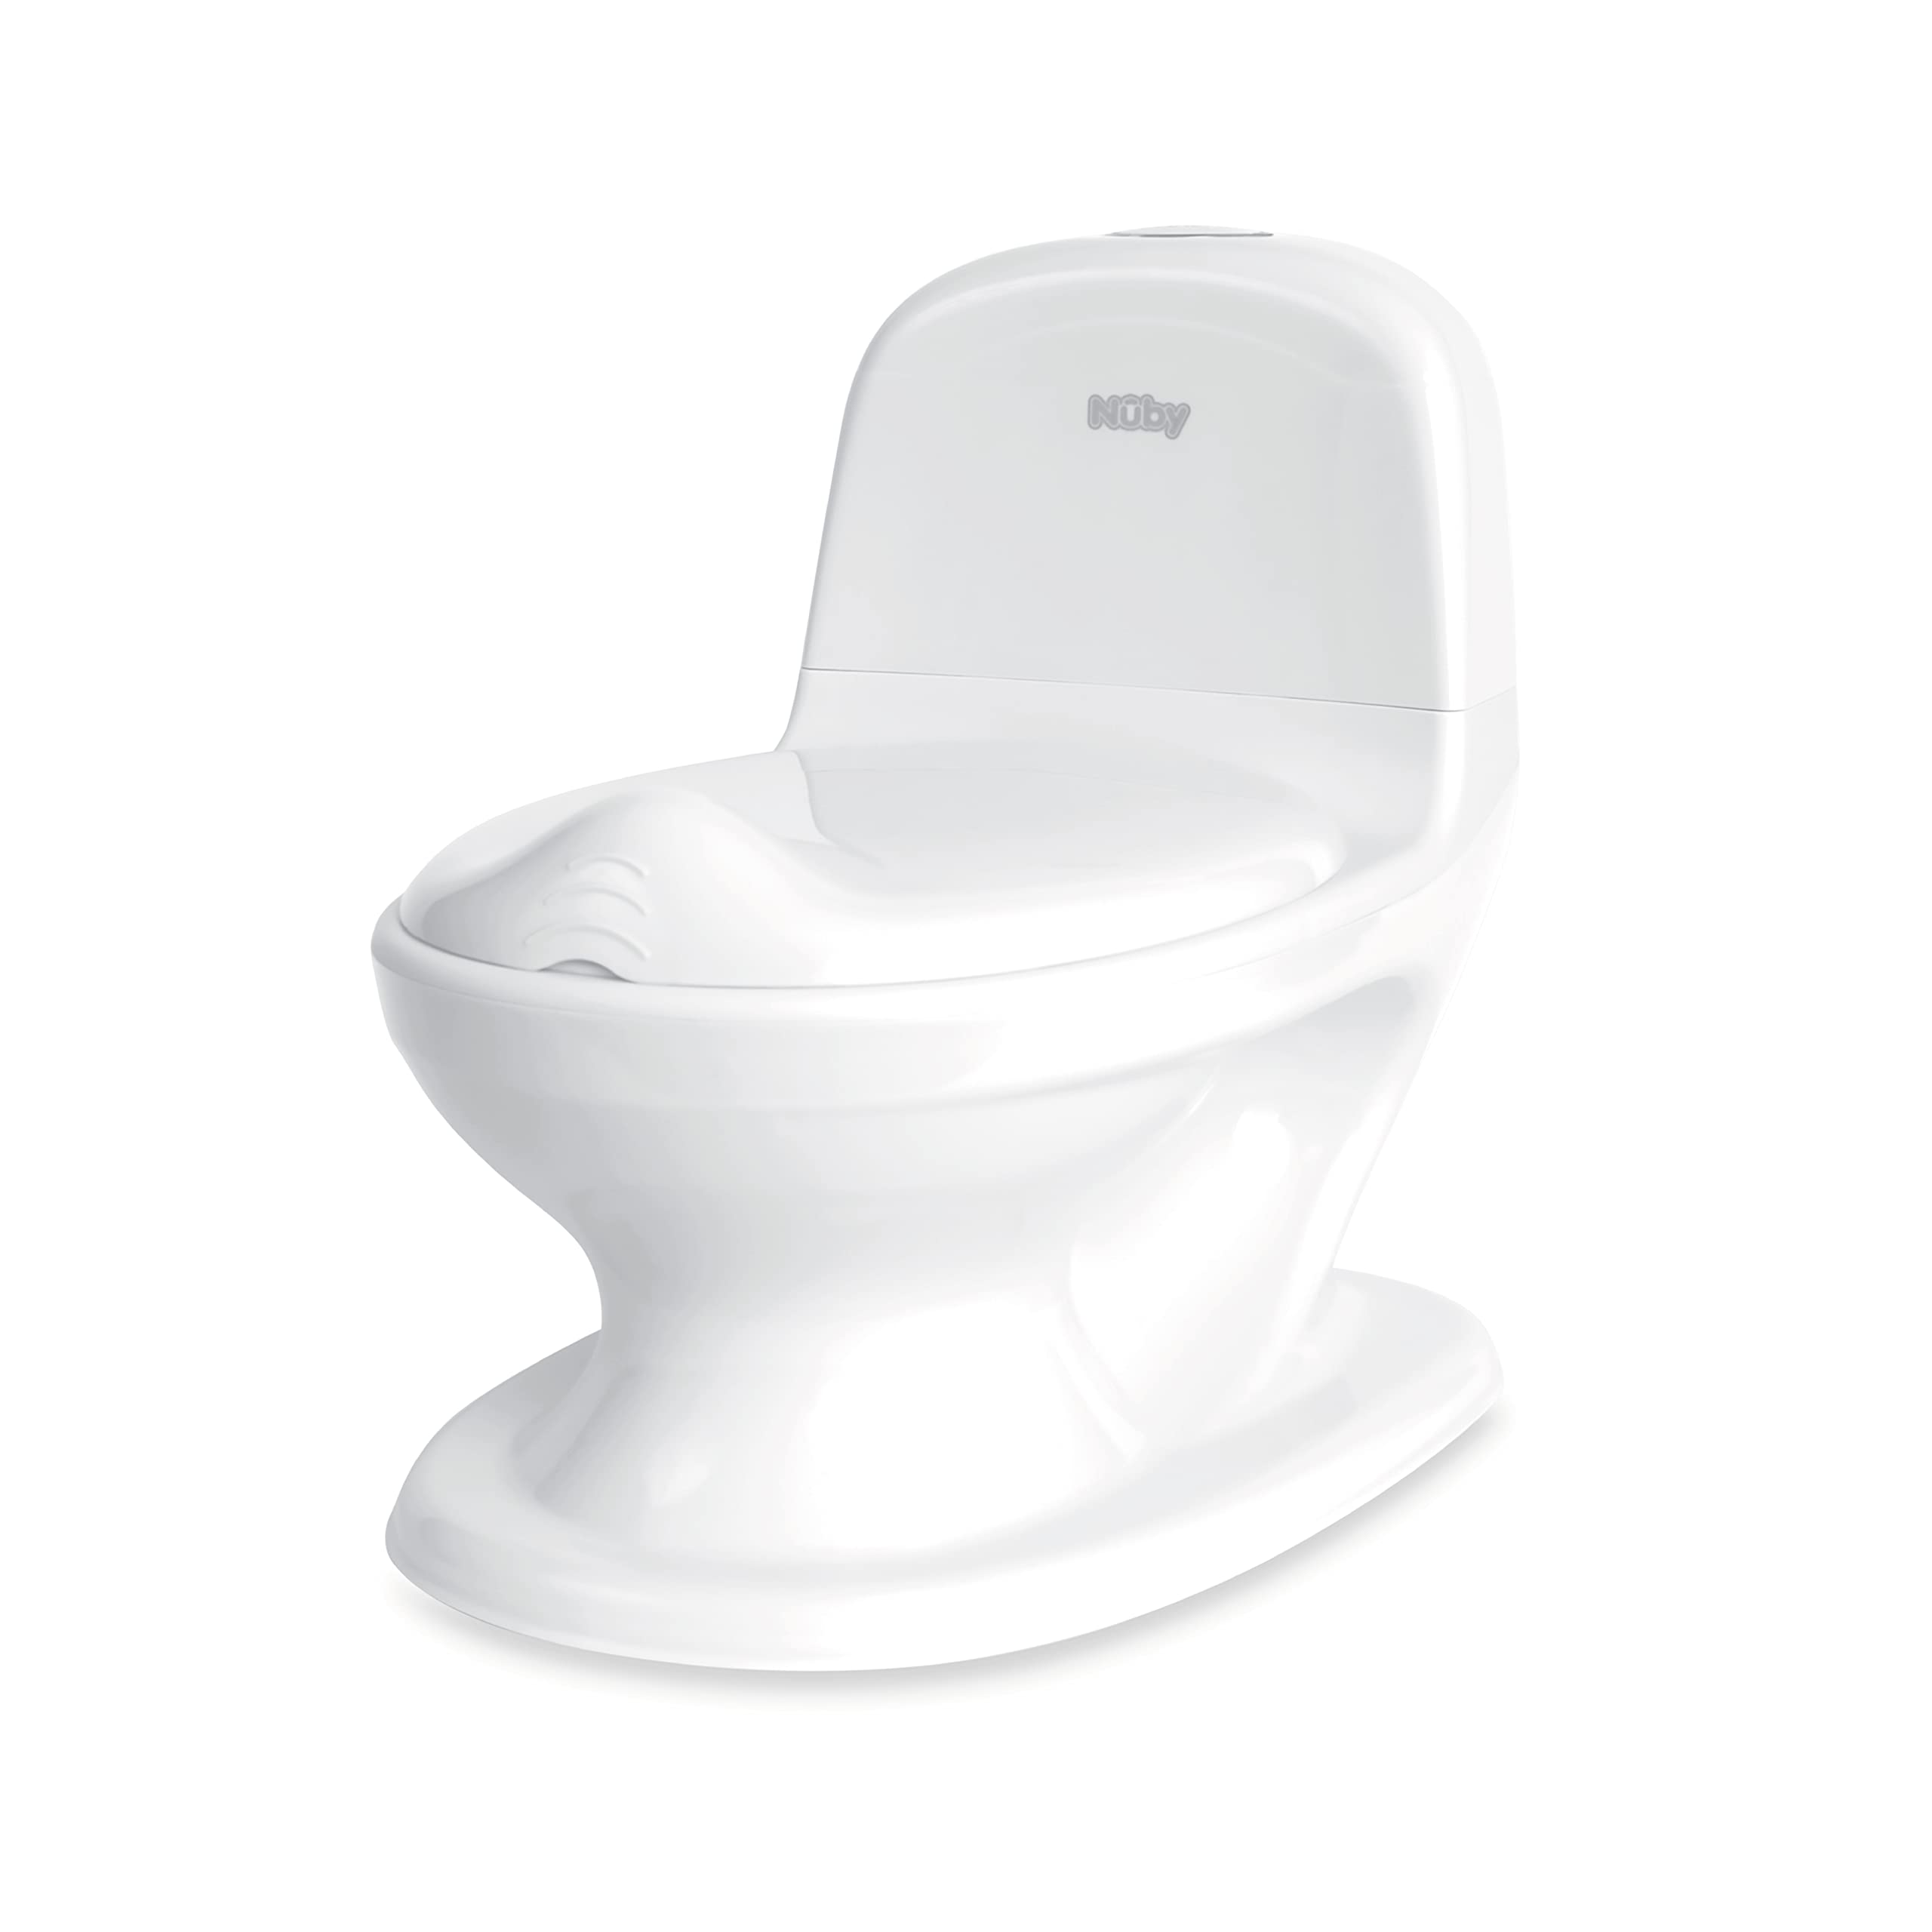 Nuby Potty, My Real Mini Size Toilet with Lid and Flush Sound, Potty Training Toilet for Toddlers, white